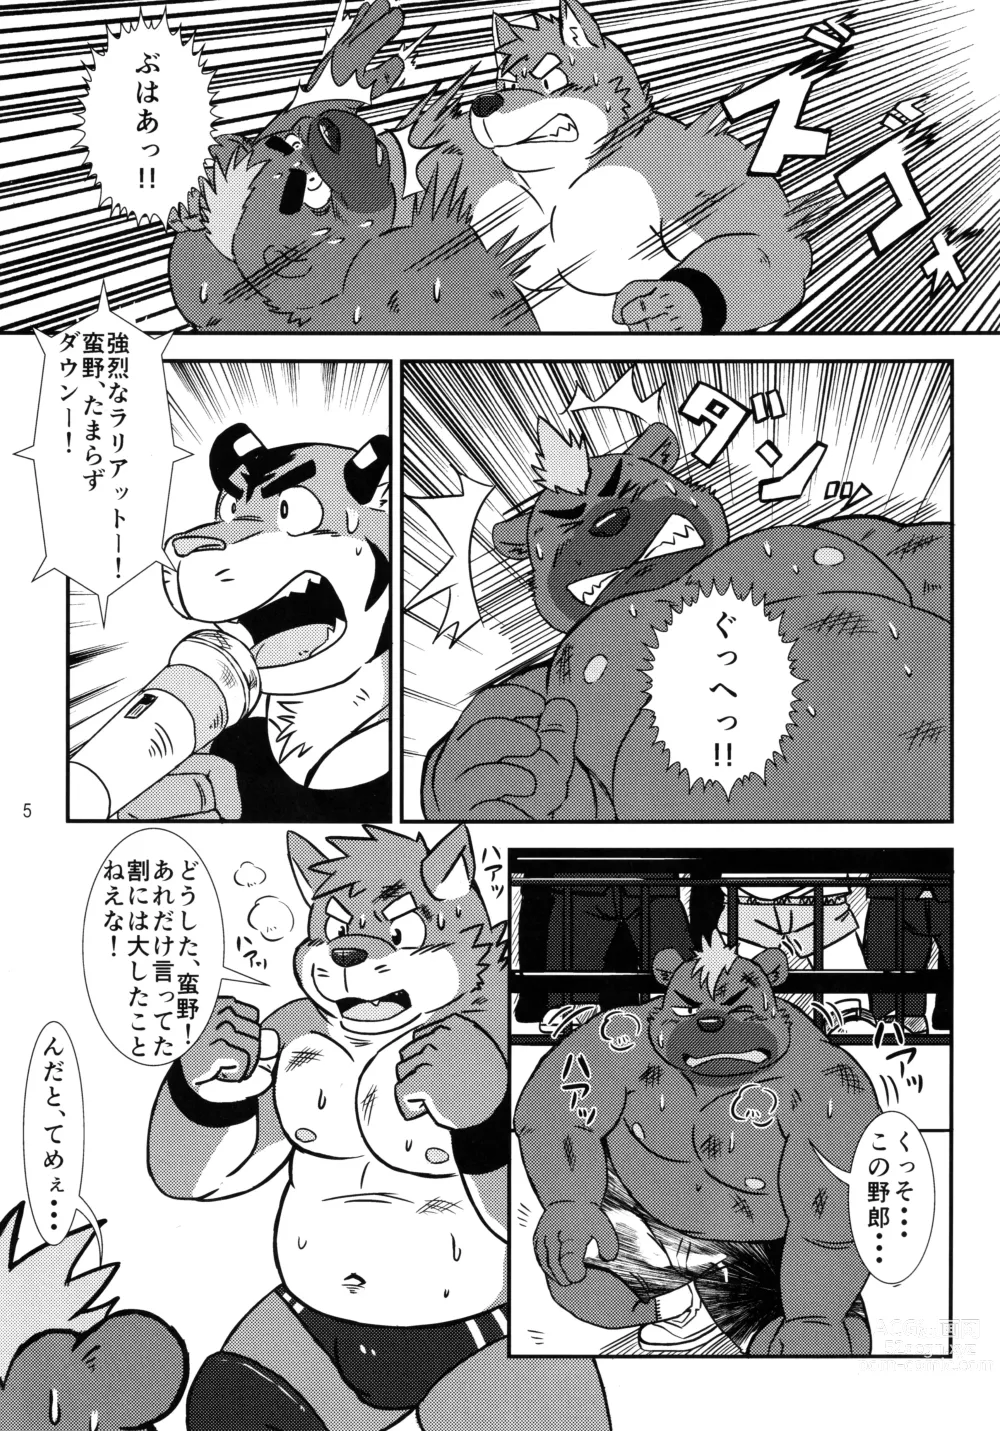 Page 6 of doujinshi BFW -BEAST FIGHTER WRESTLING-